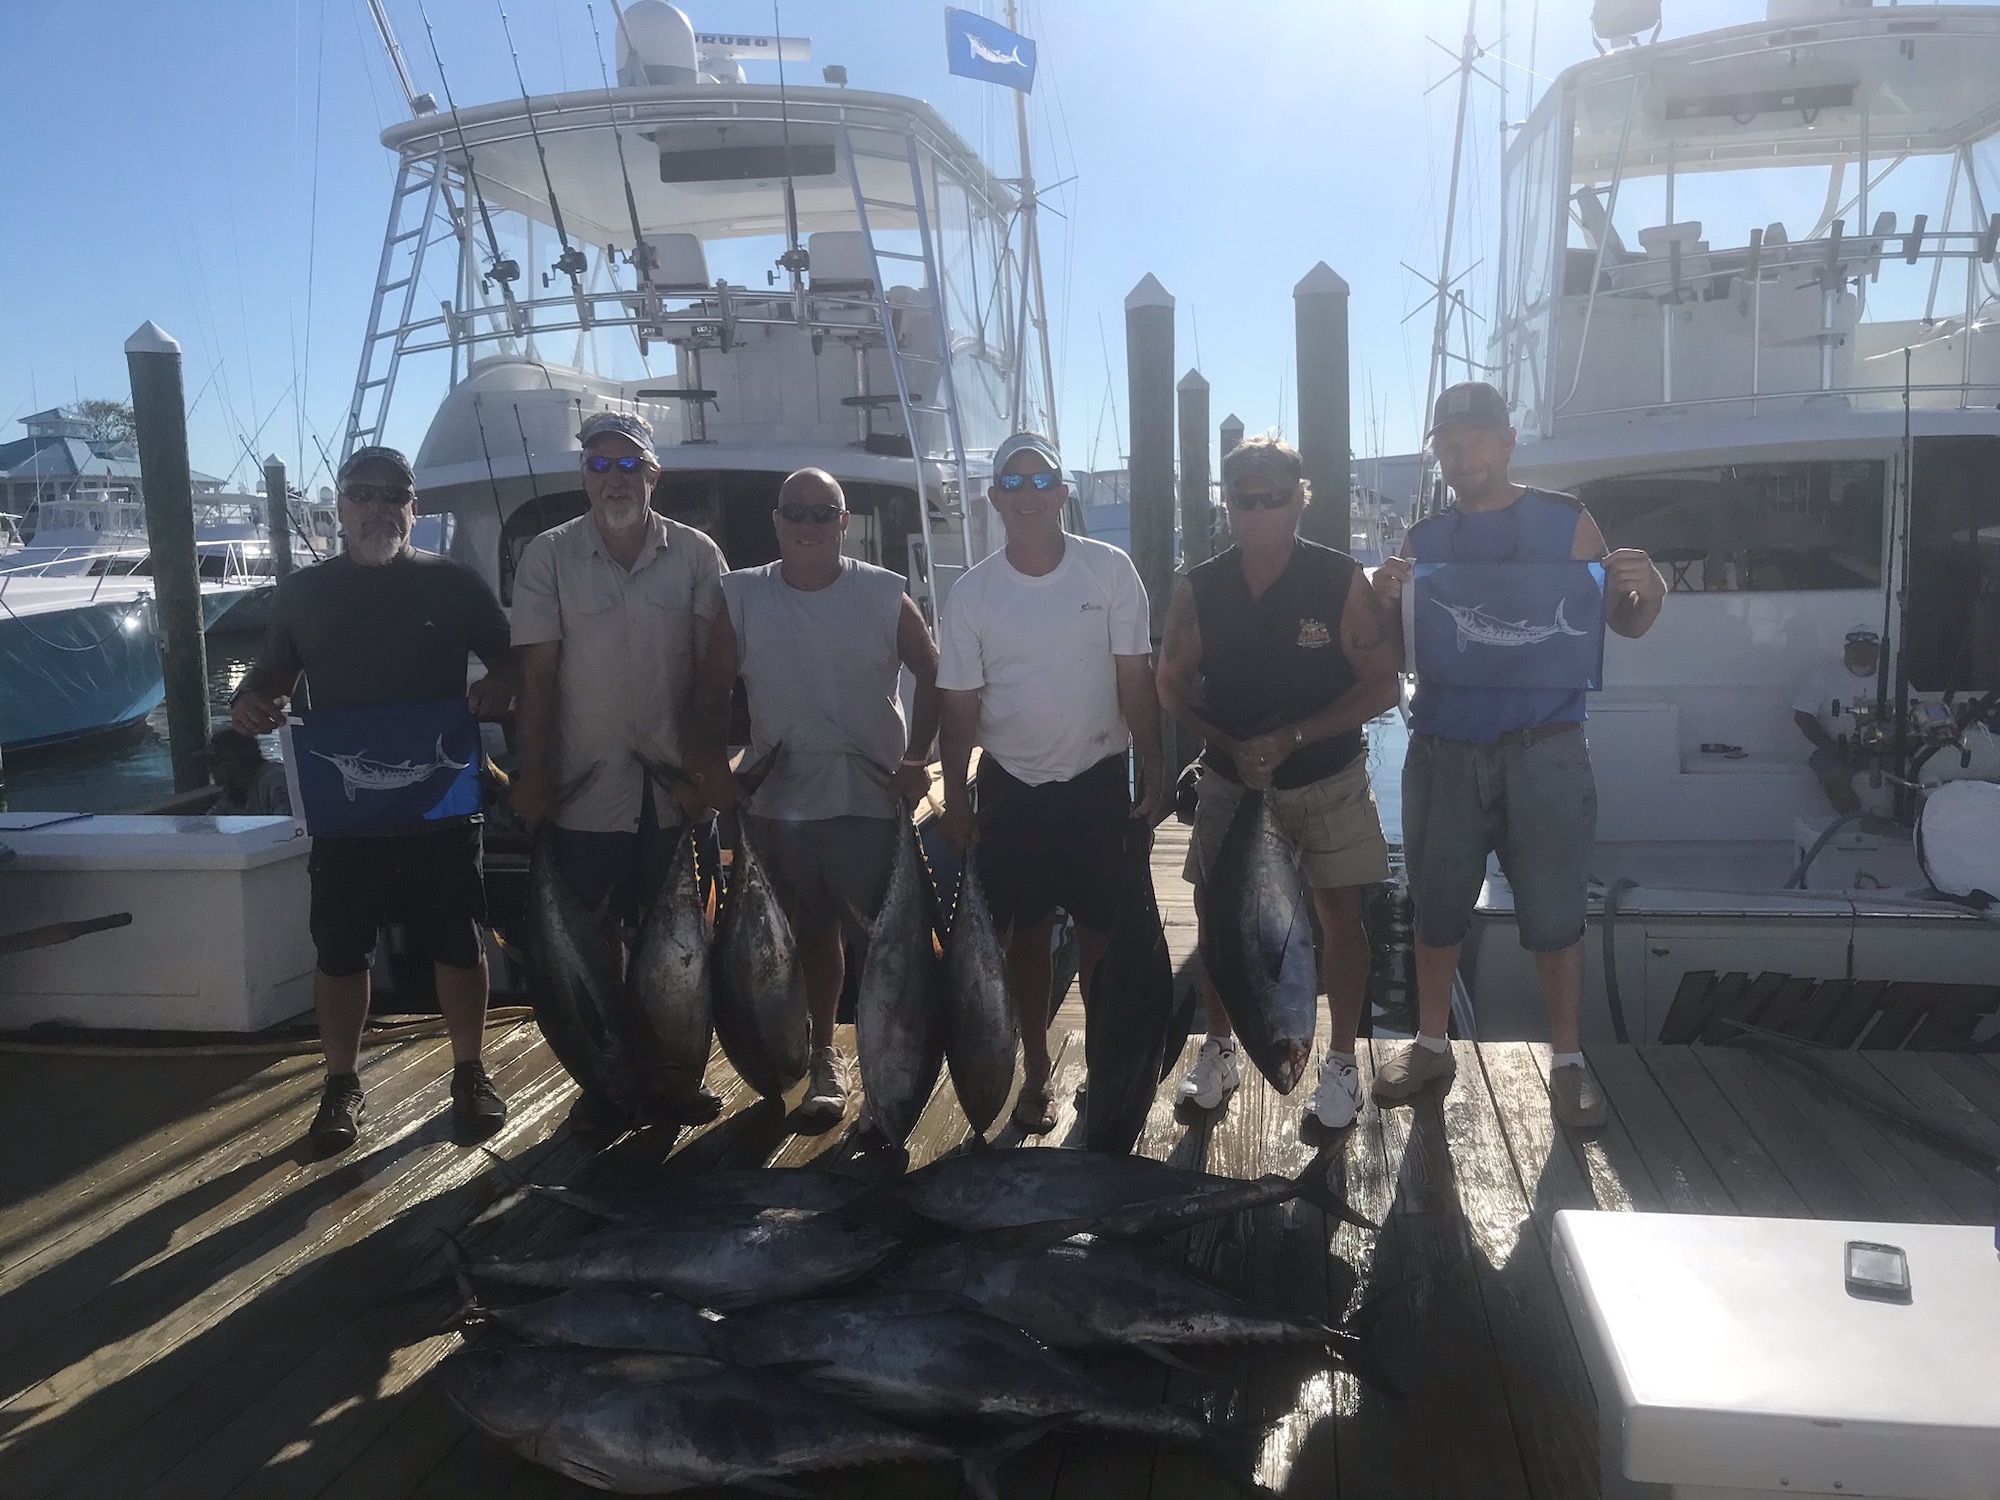 Another Insane Day of Tuna Fishing - Ocean City MD Fishing